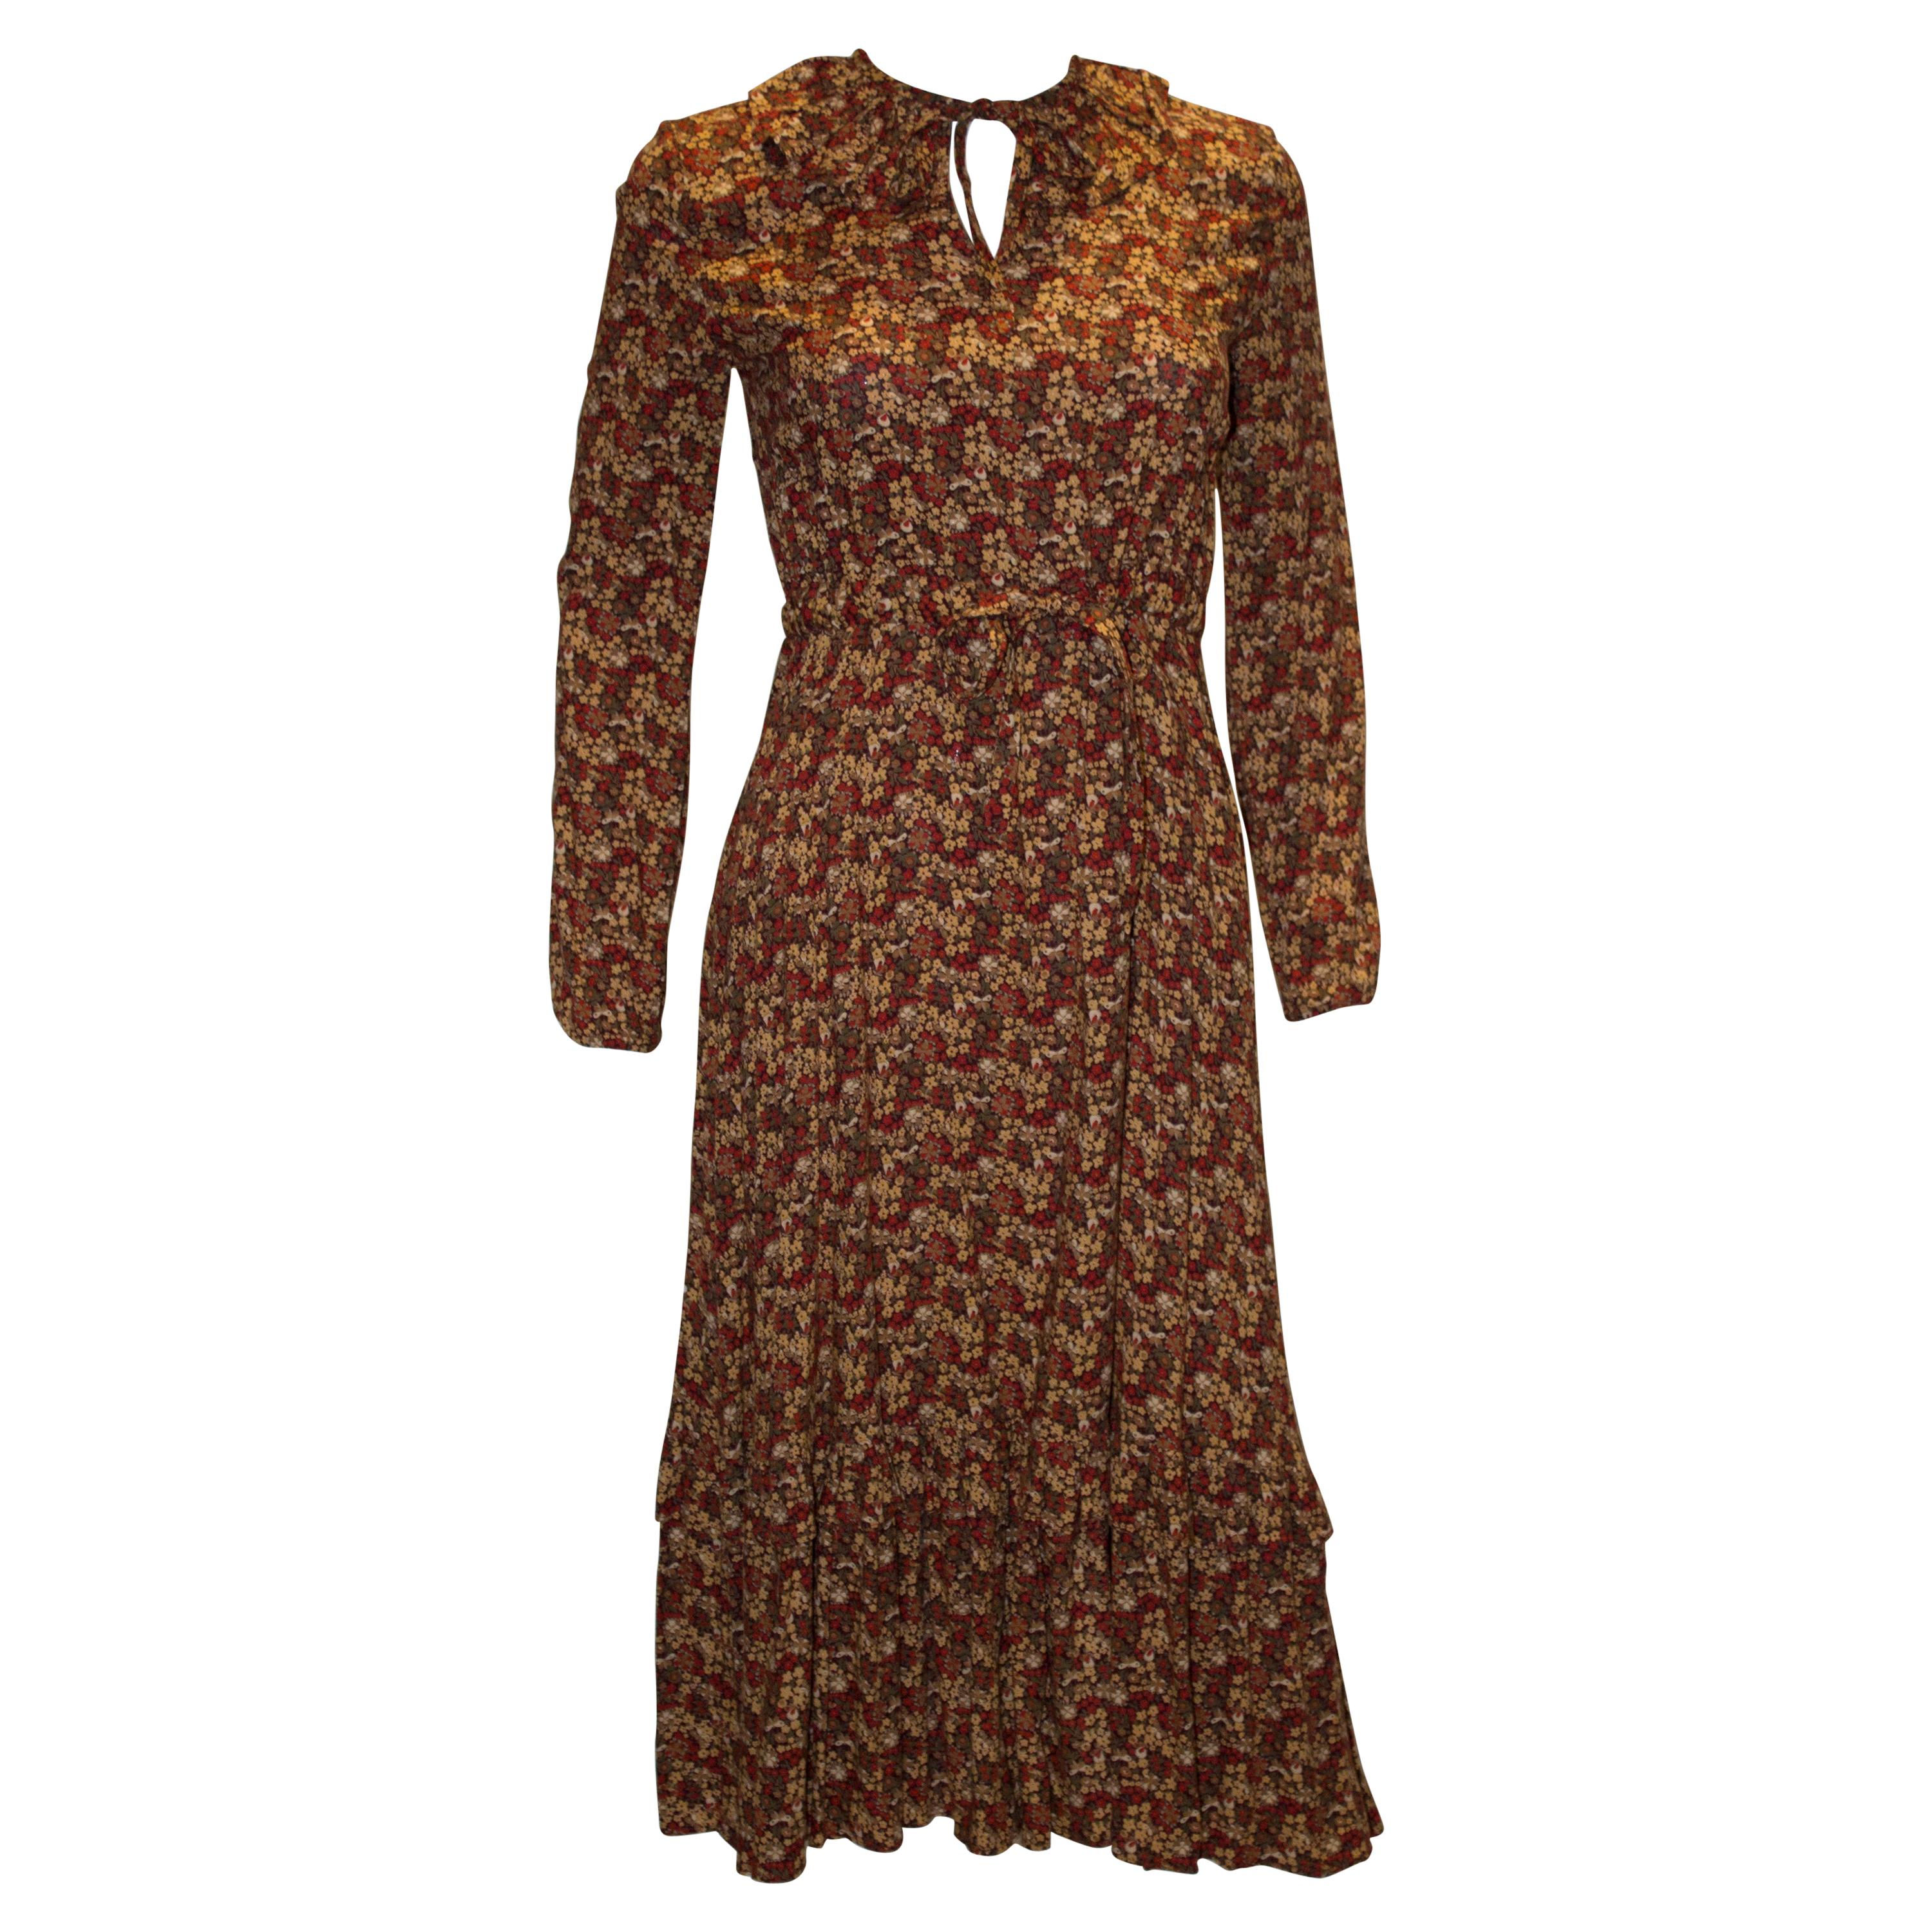 Vintage 1970s Floral Print Dress with Frill Collar For Sale